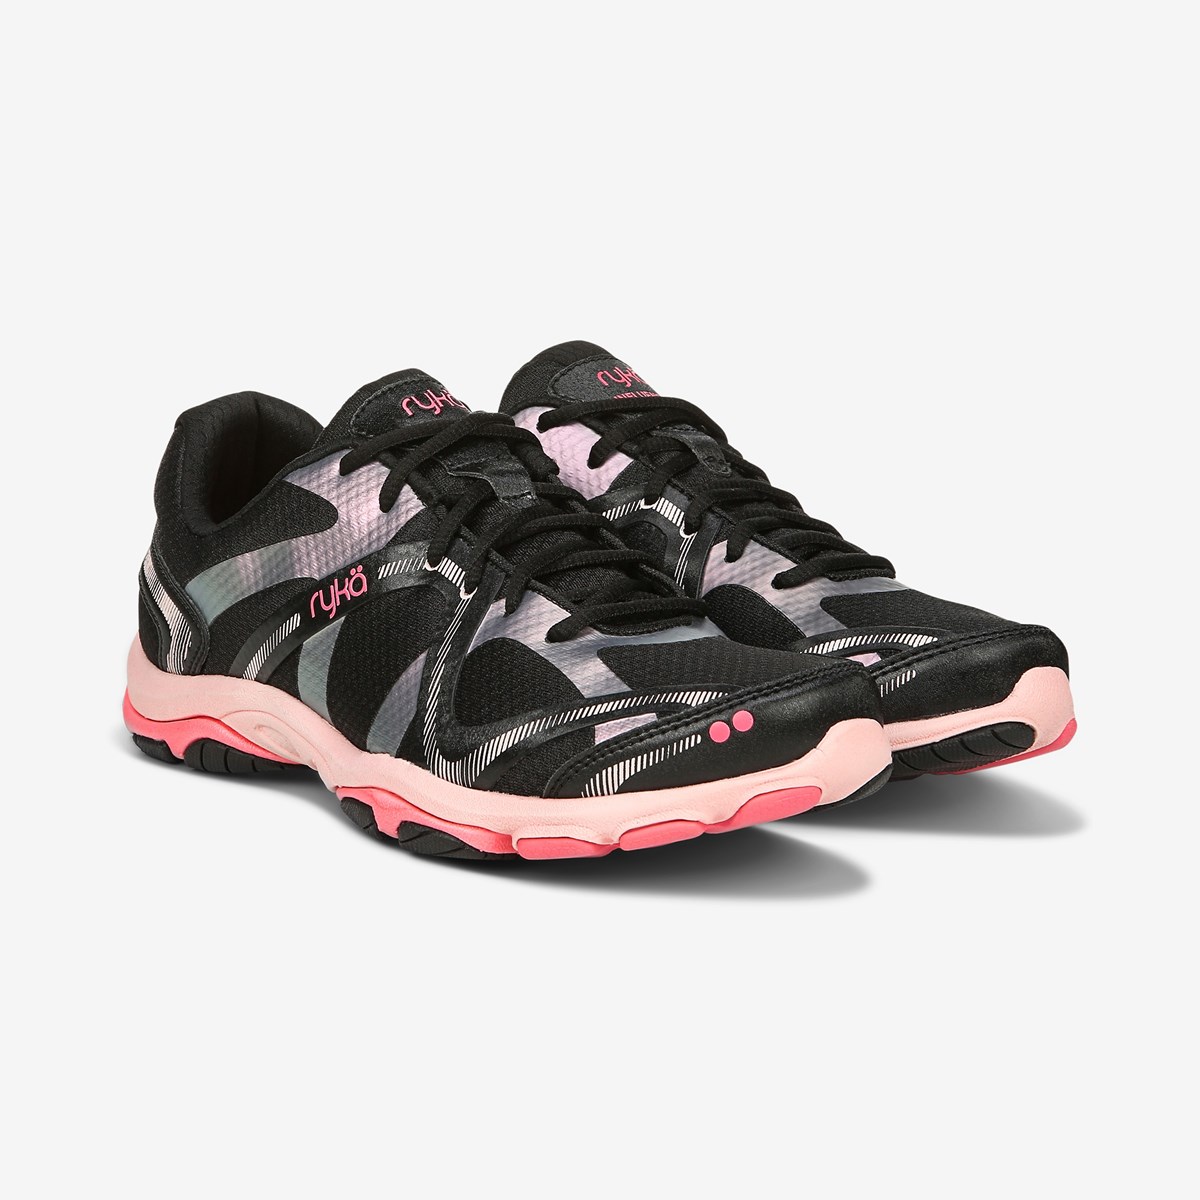 ryka fitness shoes